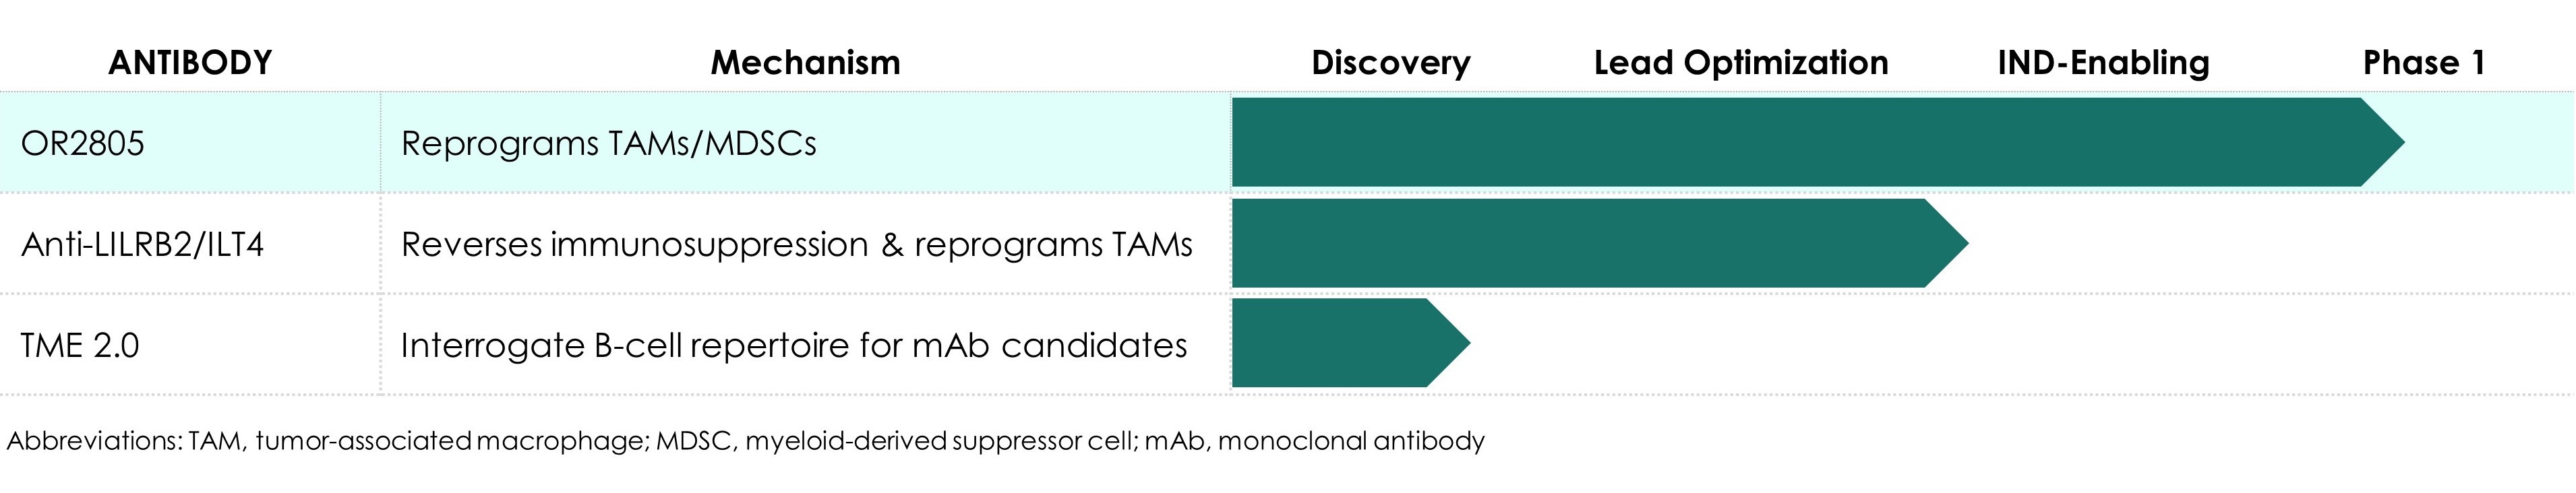 timeline of company antibodies in various stages of preclinical and clinical development advancement